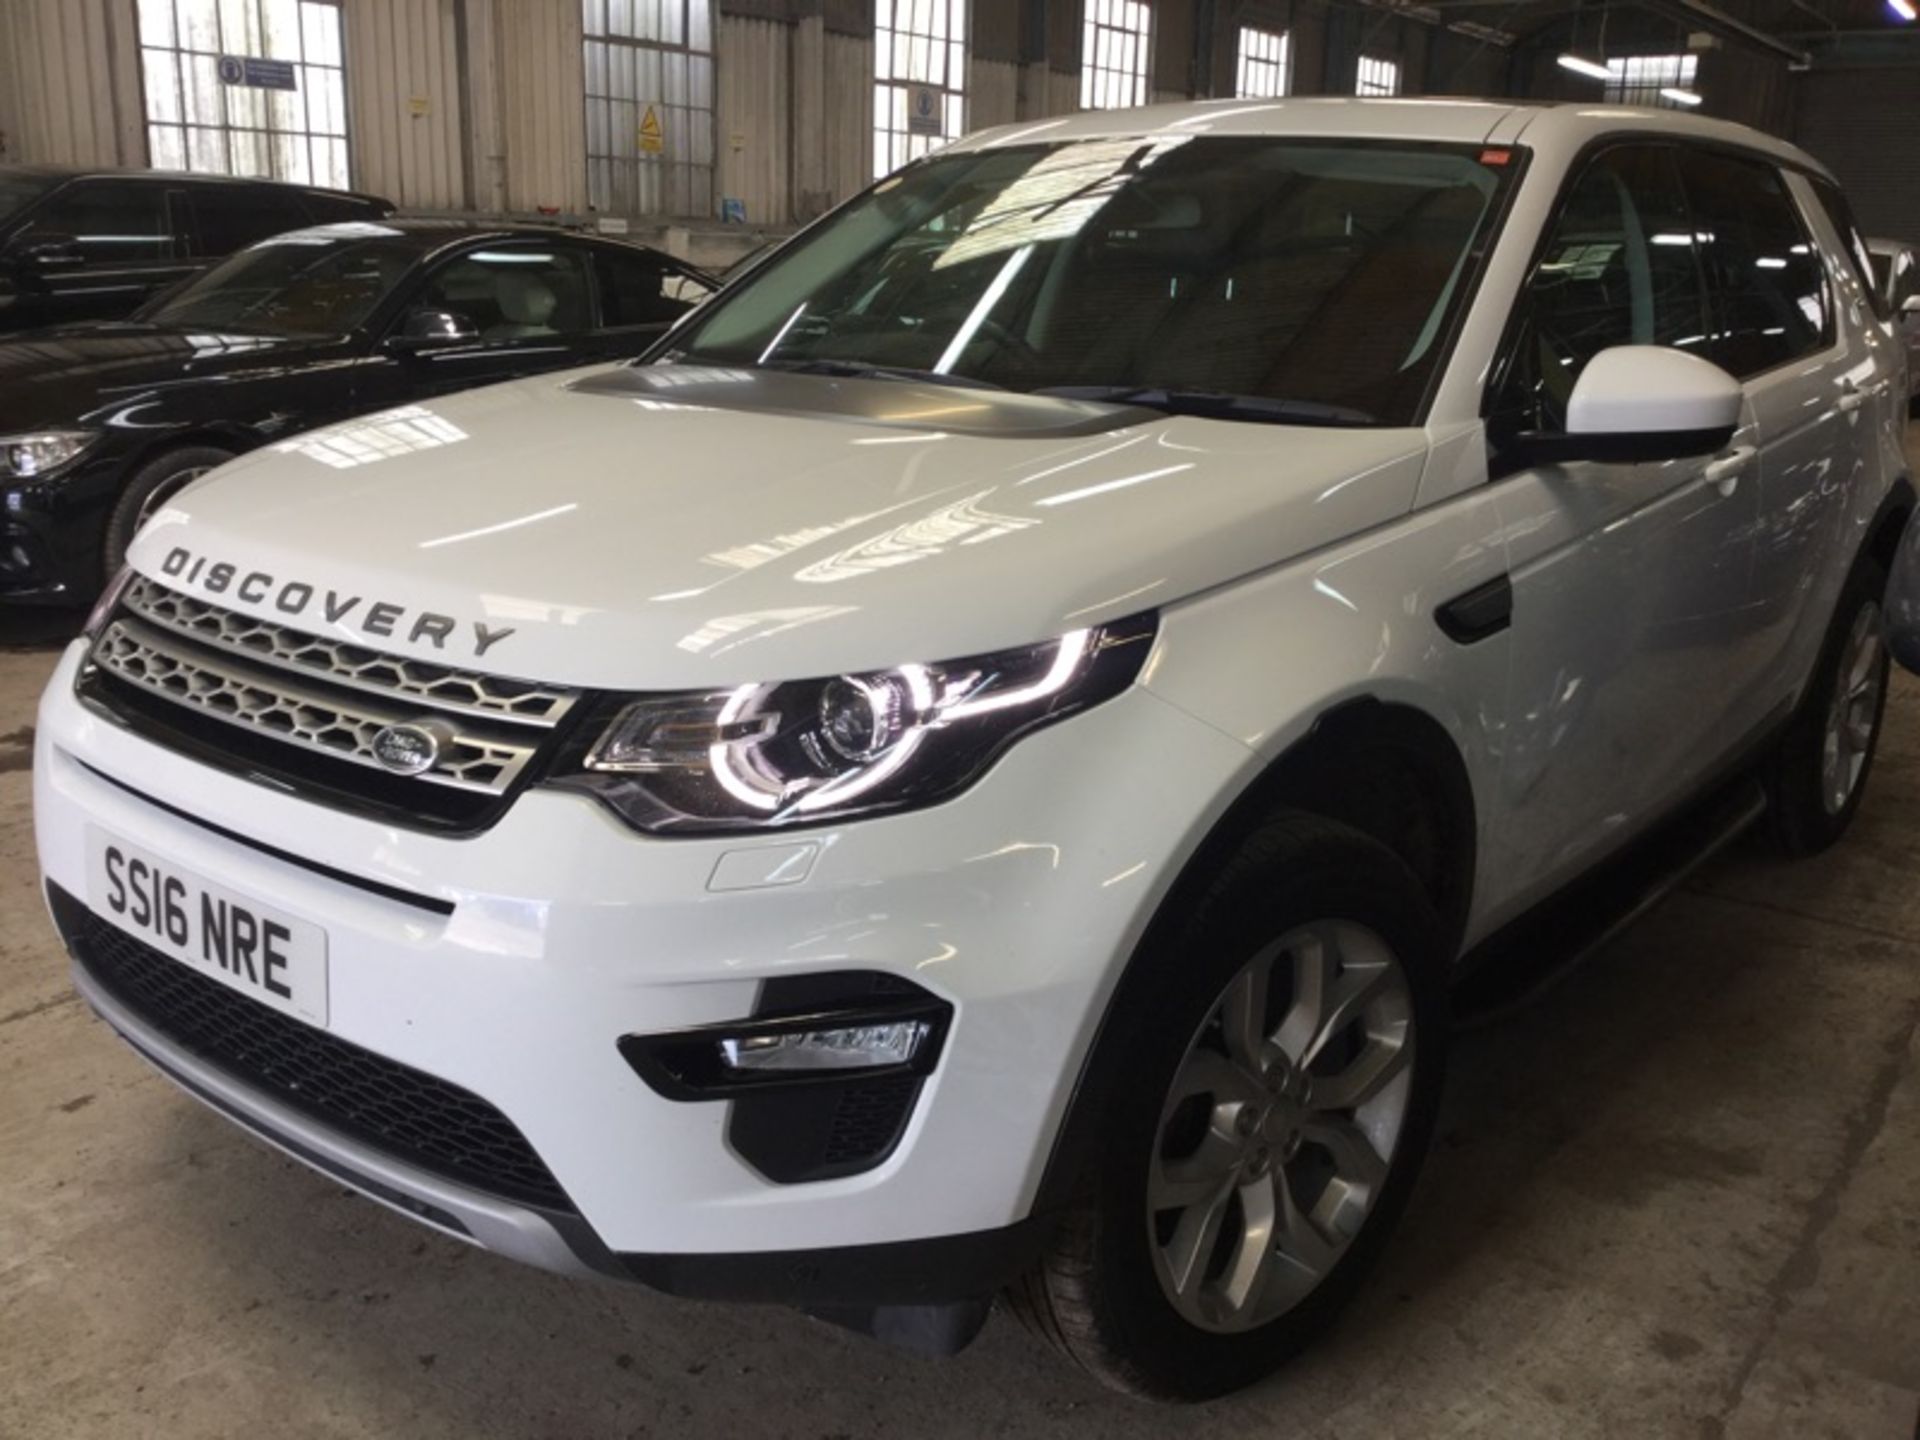 ** ON SALE ** Land Rover Discovery Sport TD4 180 HSE 2.0 2016'16 Reg'-Alloy Wheels-7 seats- - Image 2 of 9